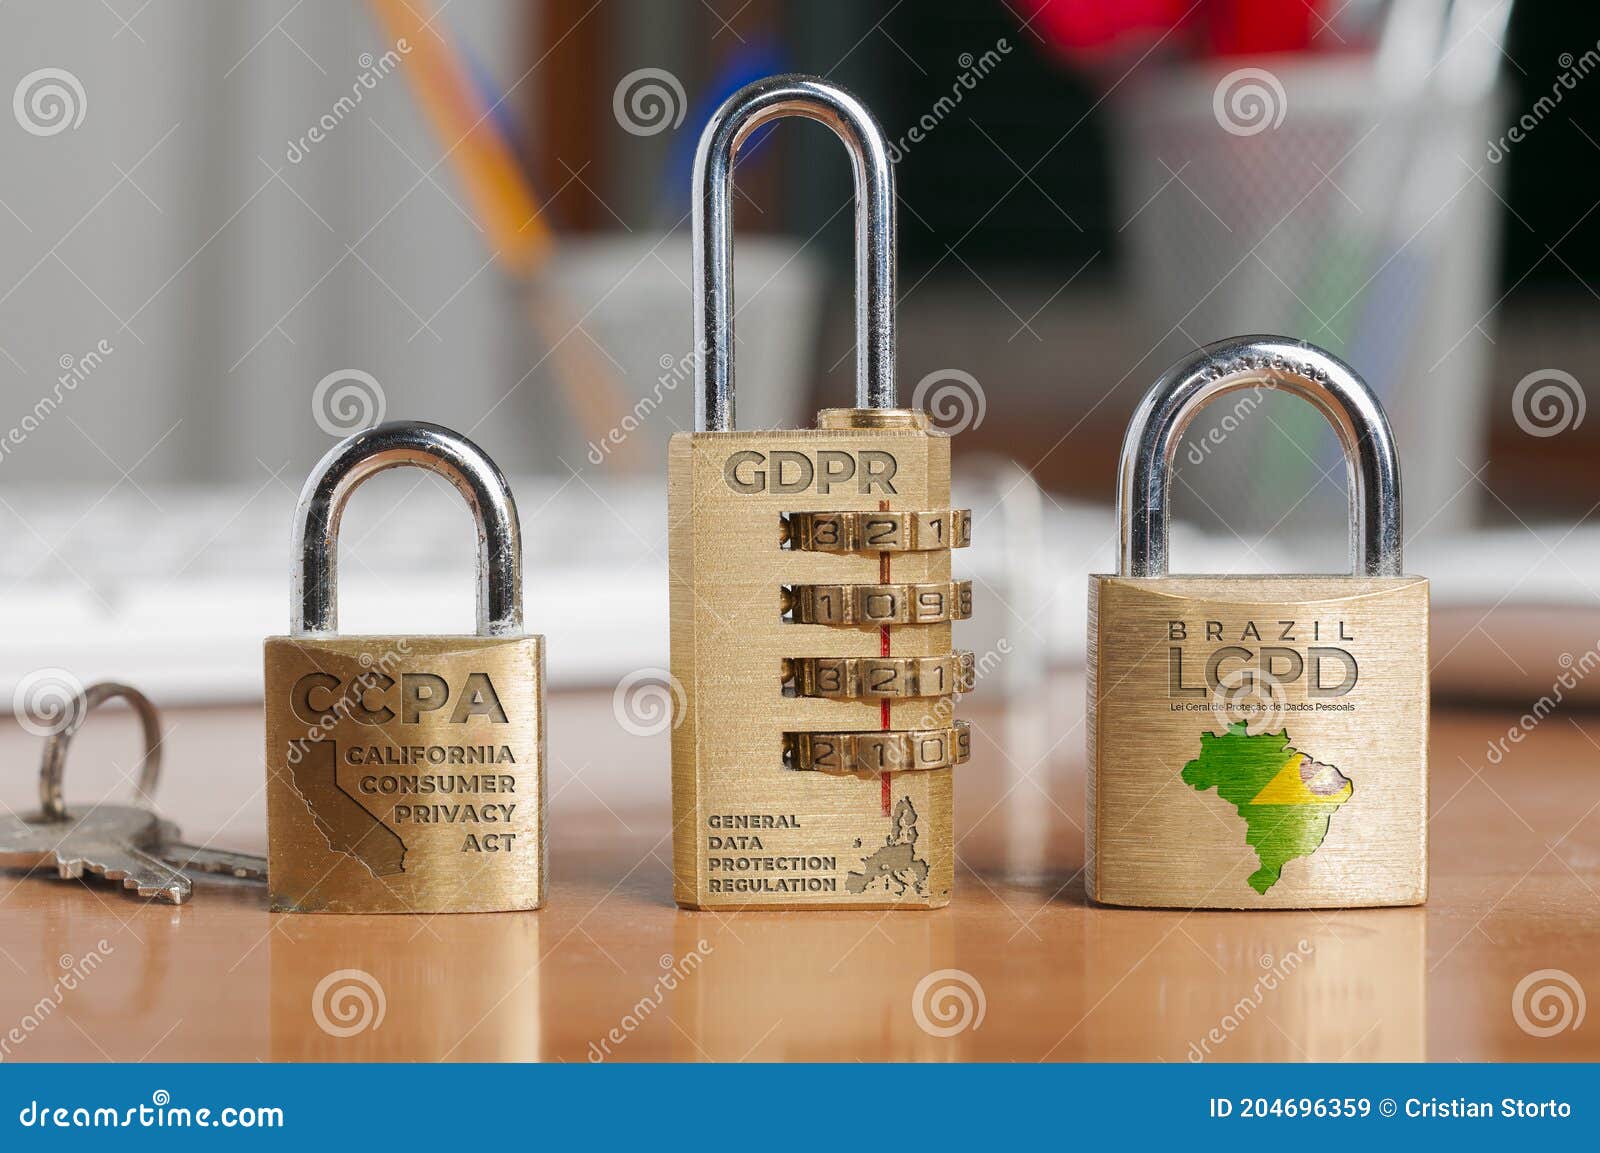 data protection laws concept: three locks shows the names of three data protection laws: california consumer privacy act, general